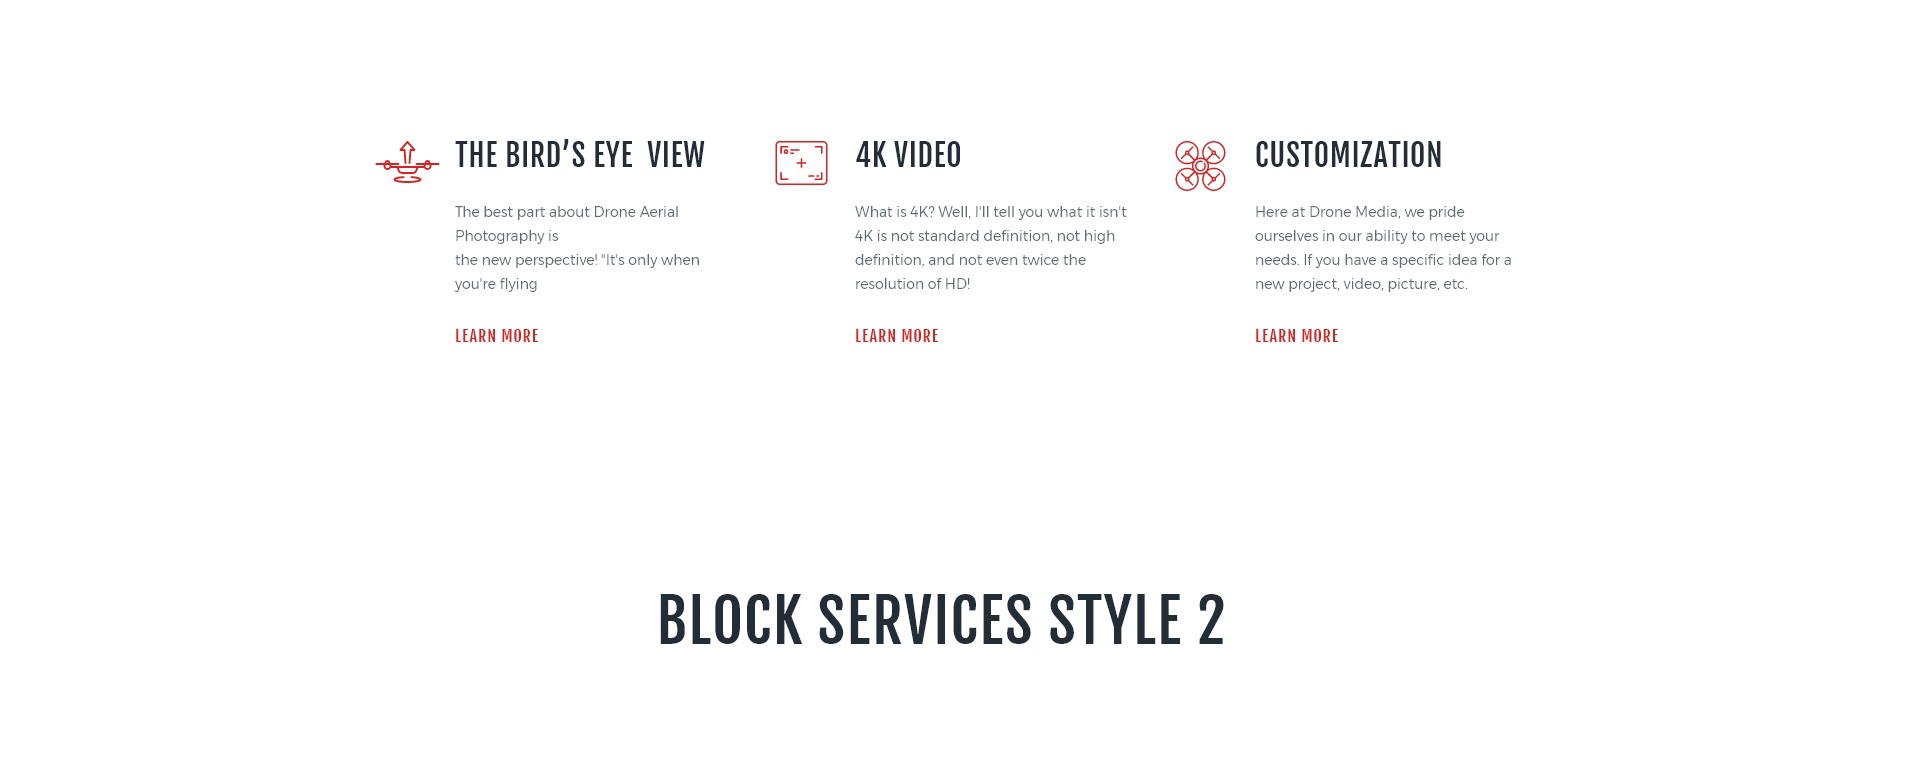 Block services style 2